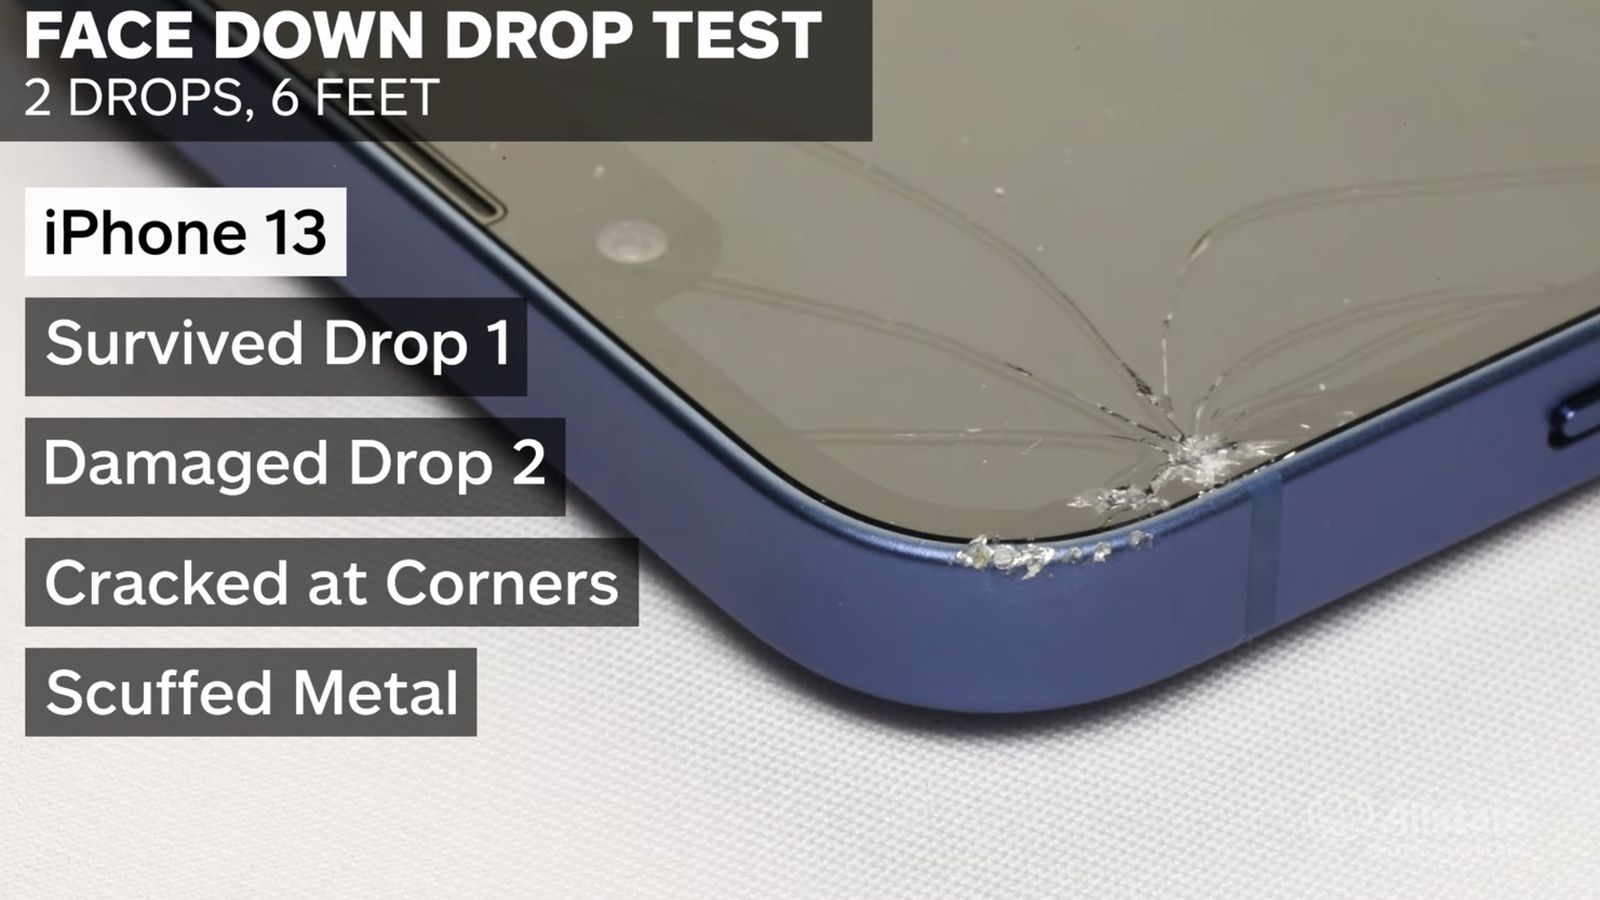 How durable is the iPhone 13?